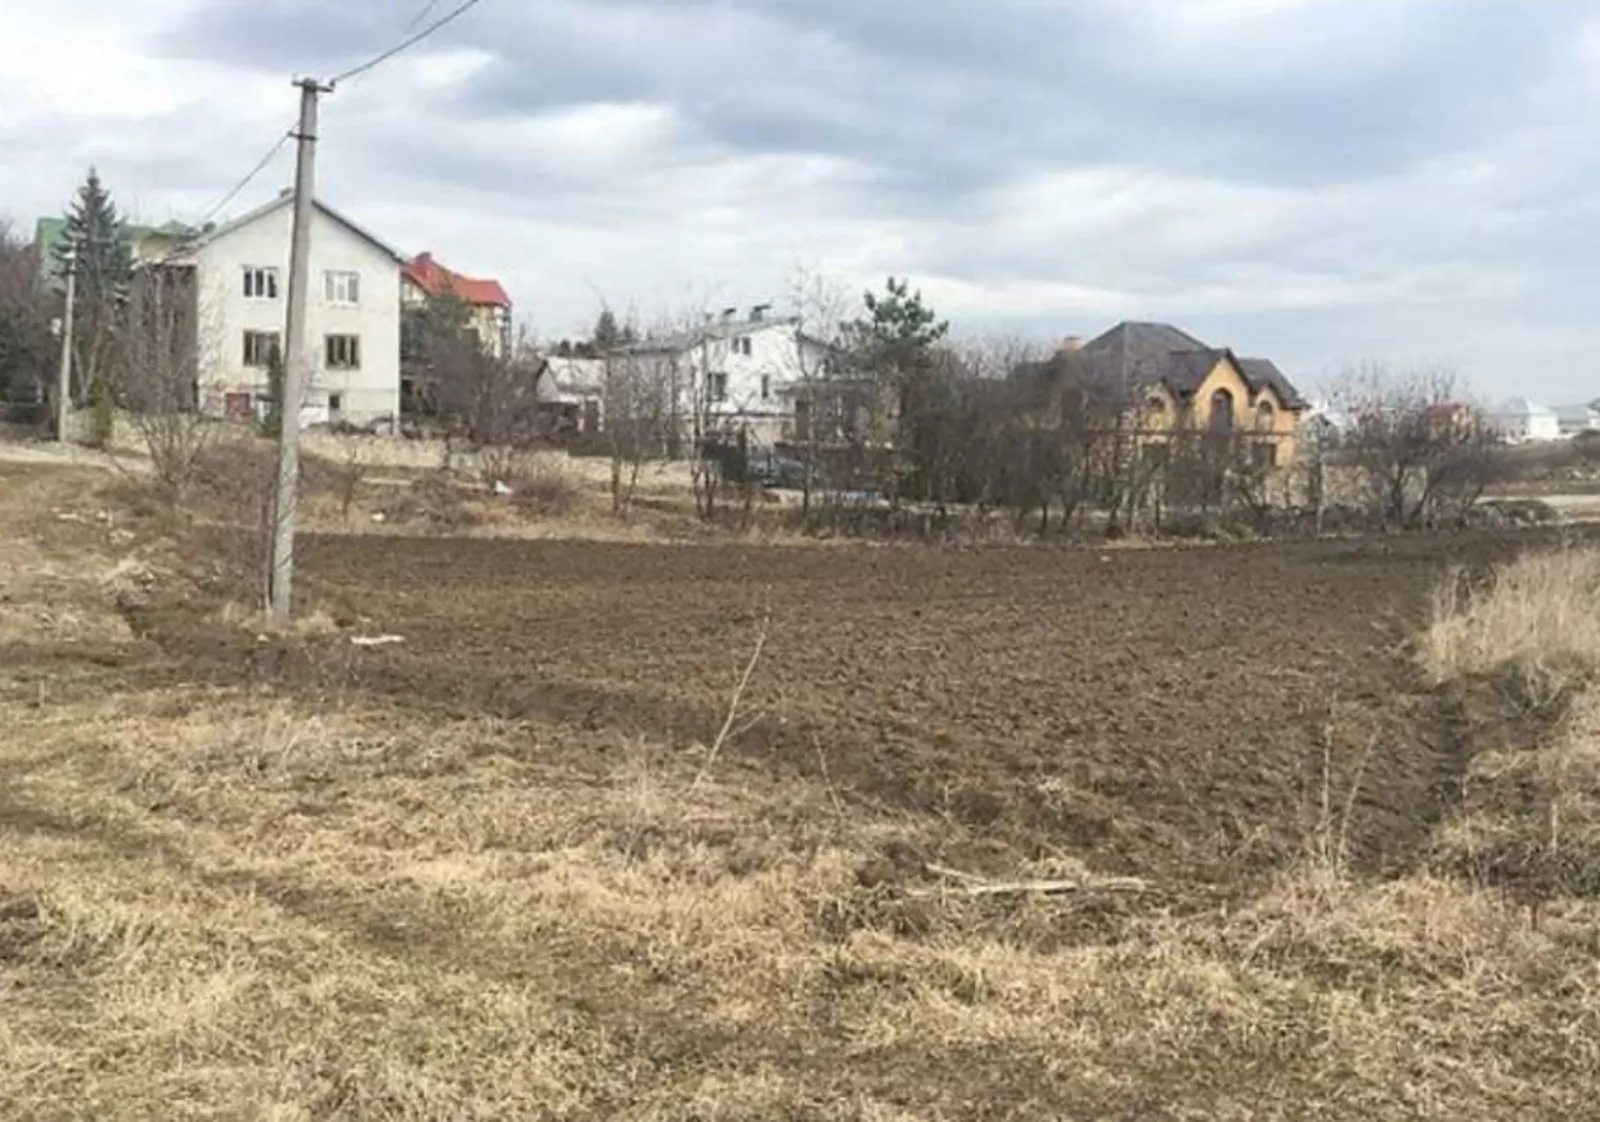 Land for sale for residential construction. Petrykov. 